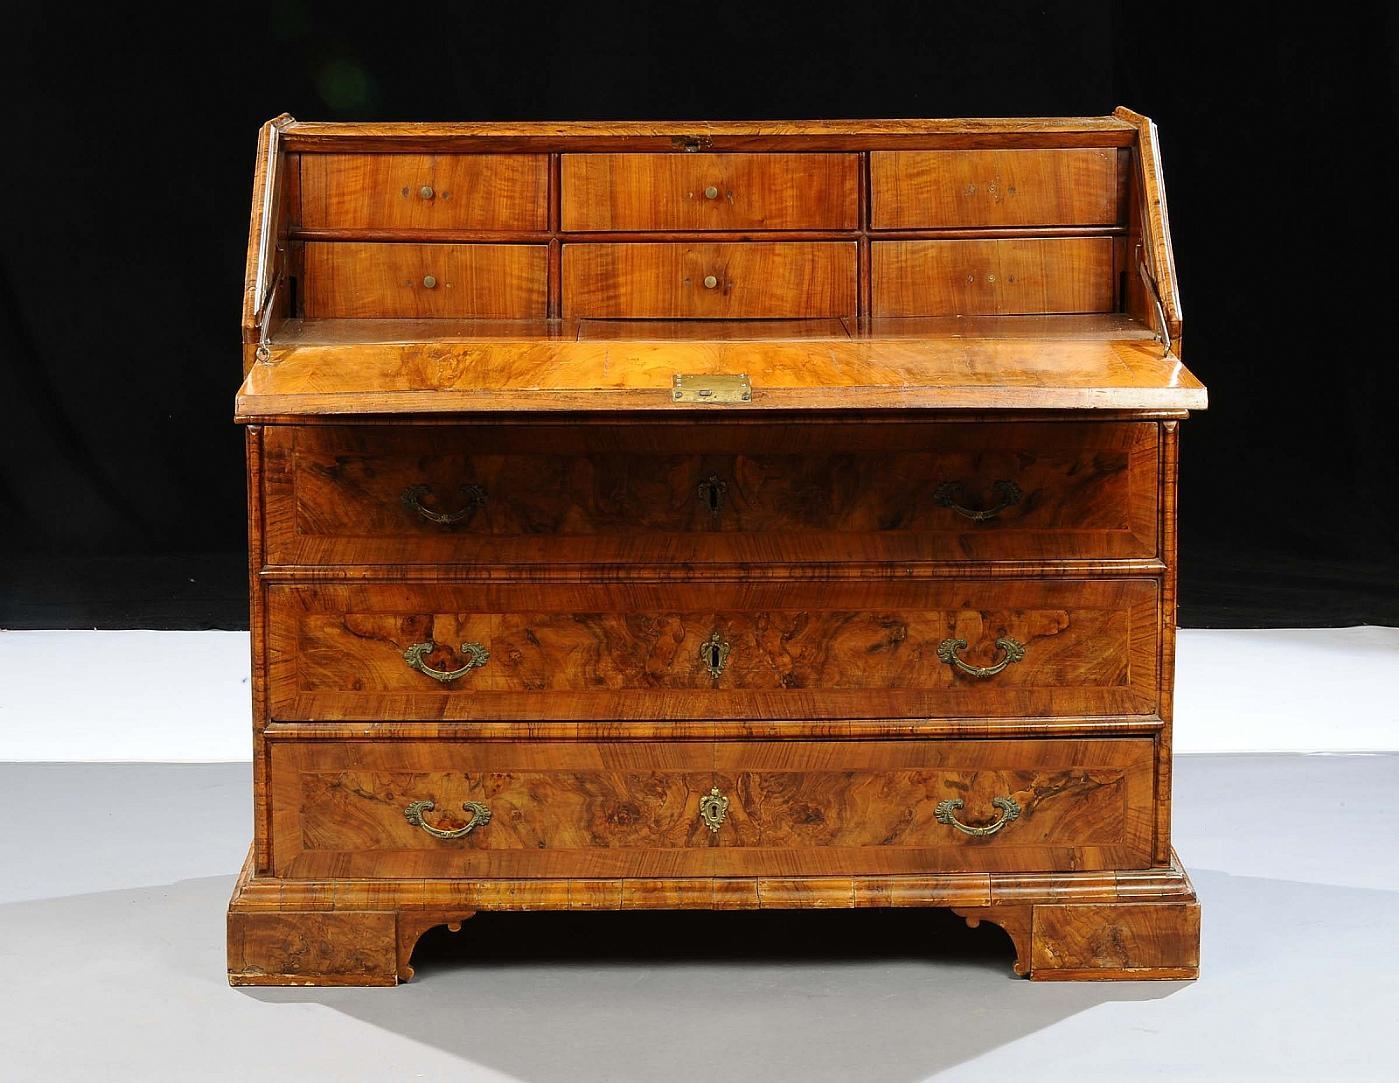 18th century, Italian walnut wood bureau chest of drawer

This bureau chest of drawer was made in Emilia, in Italy, at the beginning of the 18th century. The structure is entirely paved in the precious wood essence of walnut and walnut root. The